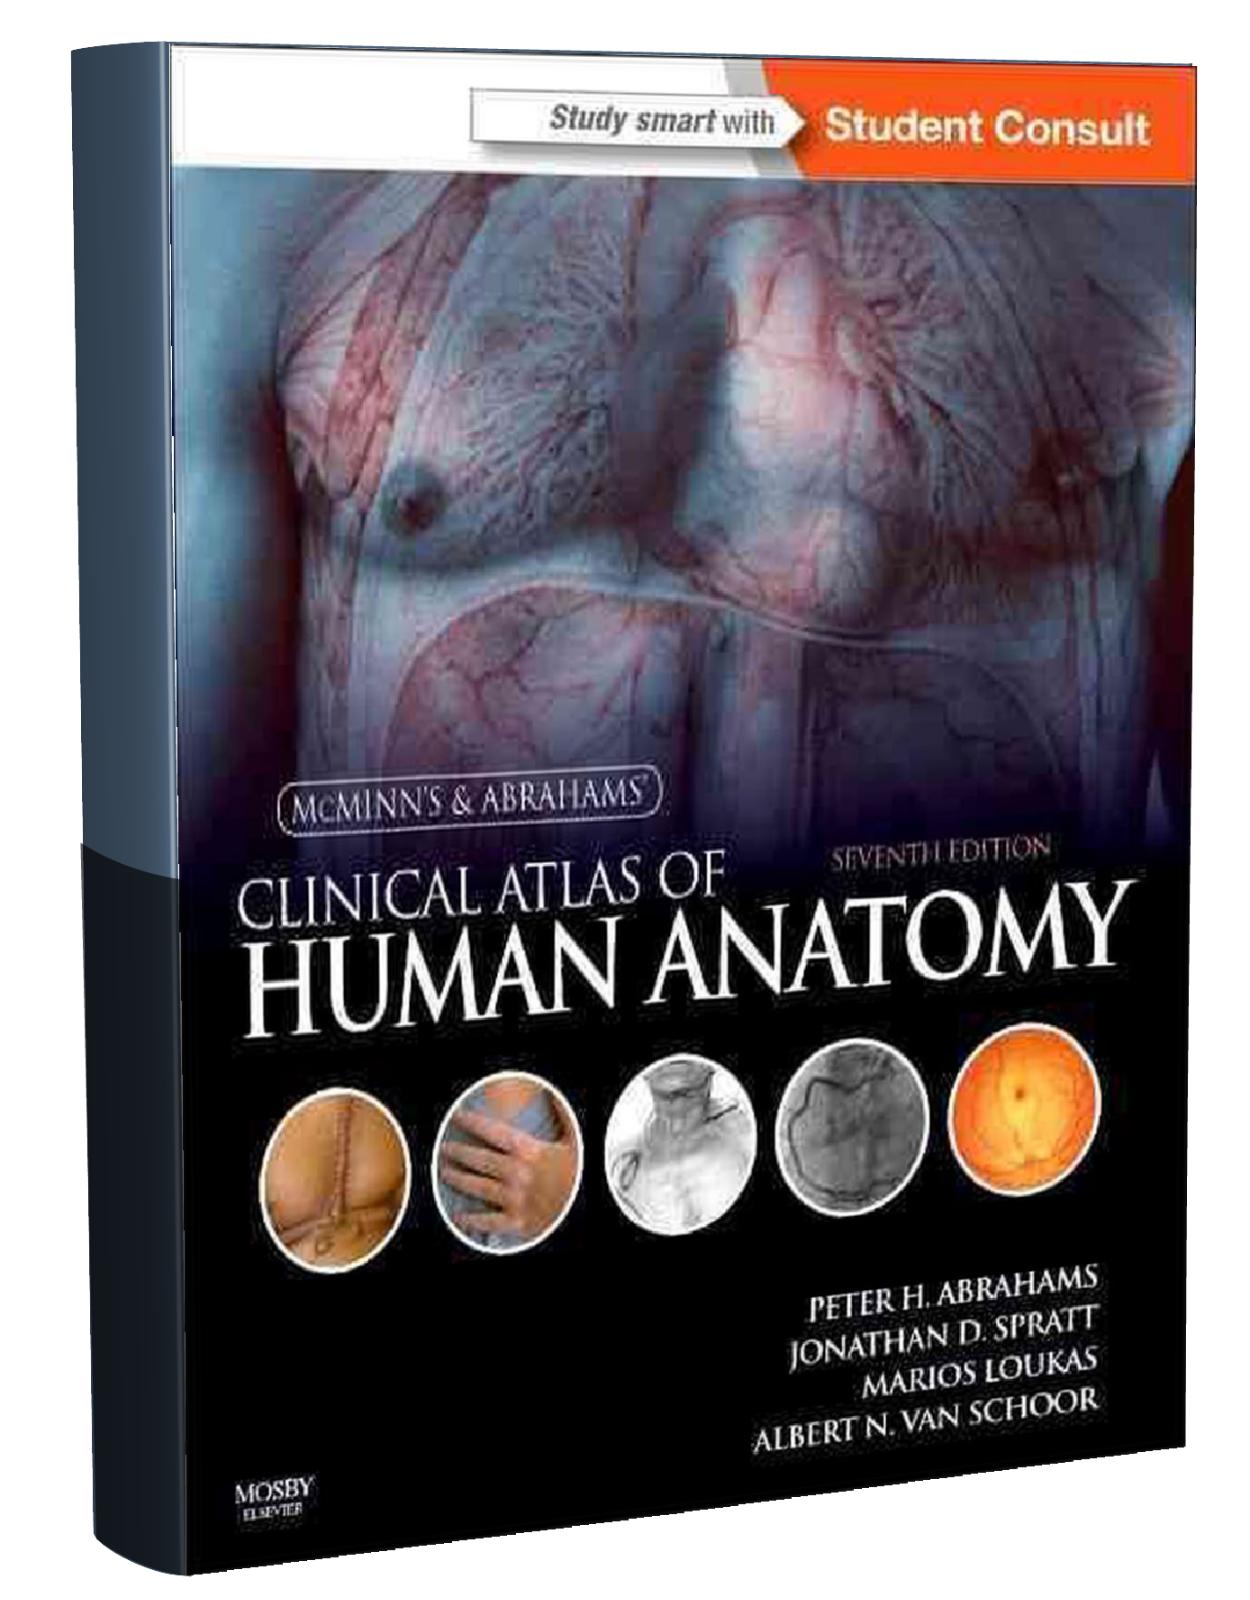 McMinn and Abrahams’ Clinical Atlas of Human Anatomy: with STUDENT CONSULT Online Access